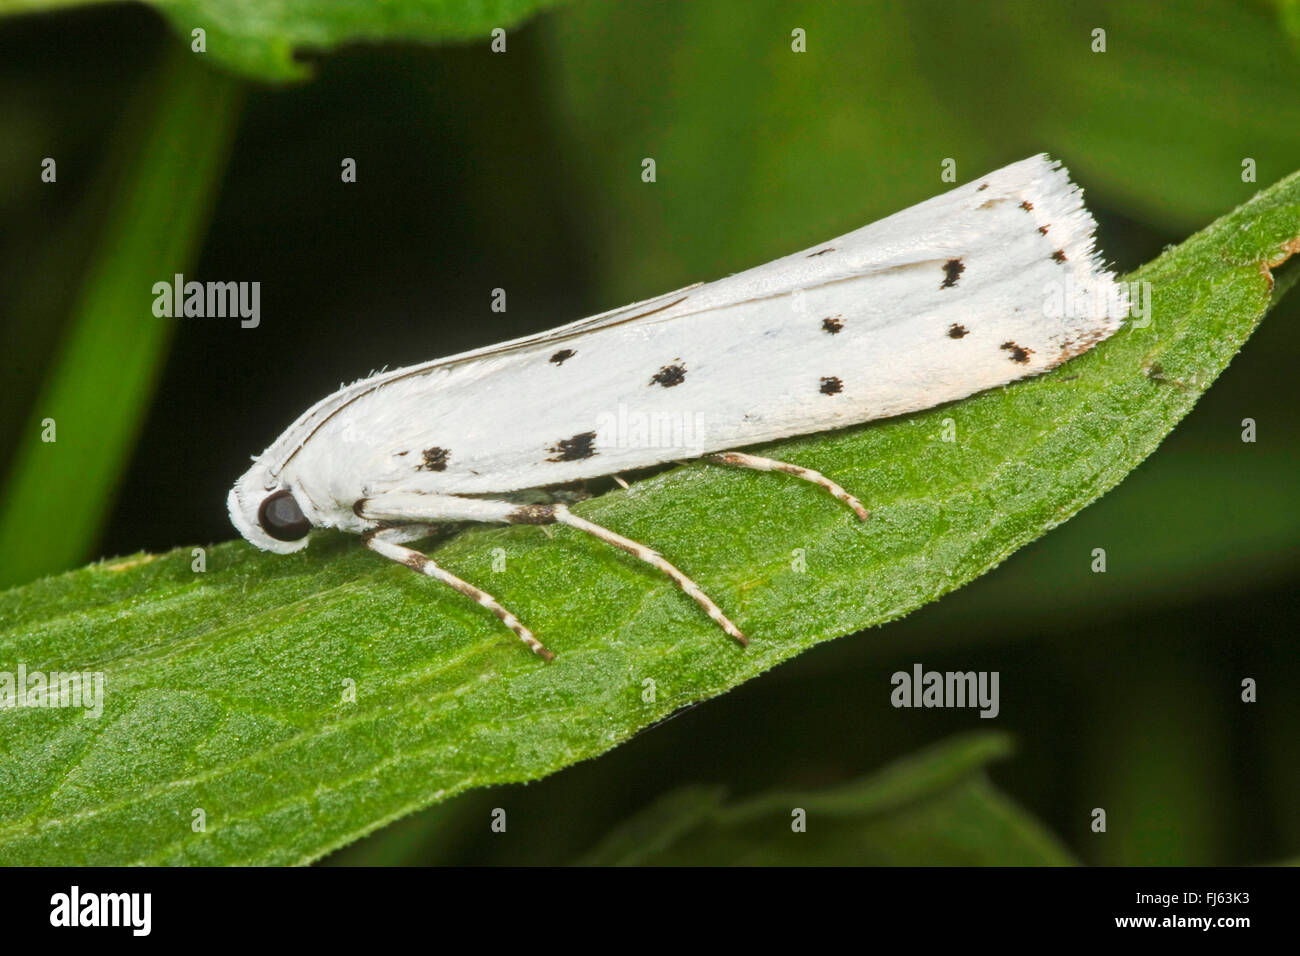 Speckled footman (Coscinia cribraria), sits on a leaf, Germany Stock Photo